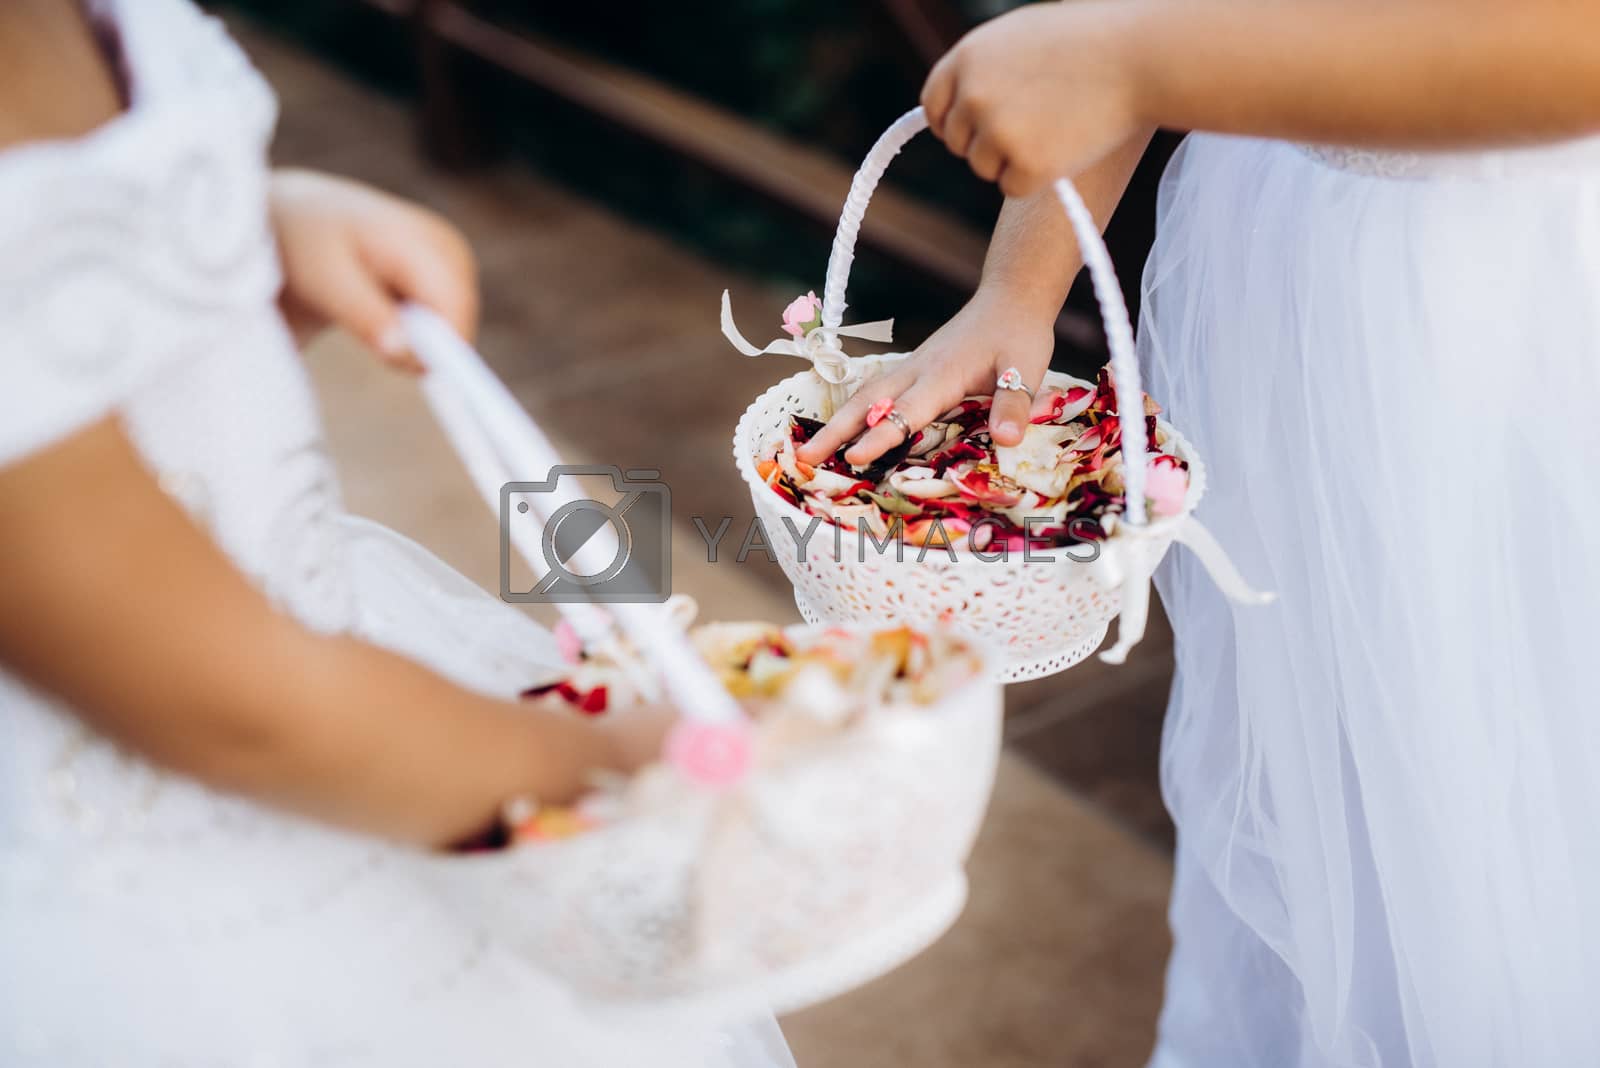 Royalty free image of rose petals for the ceremony in wedding baskets by Andreua